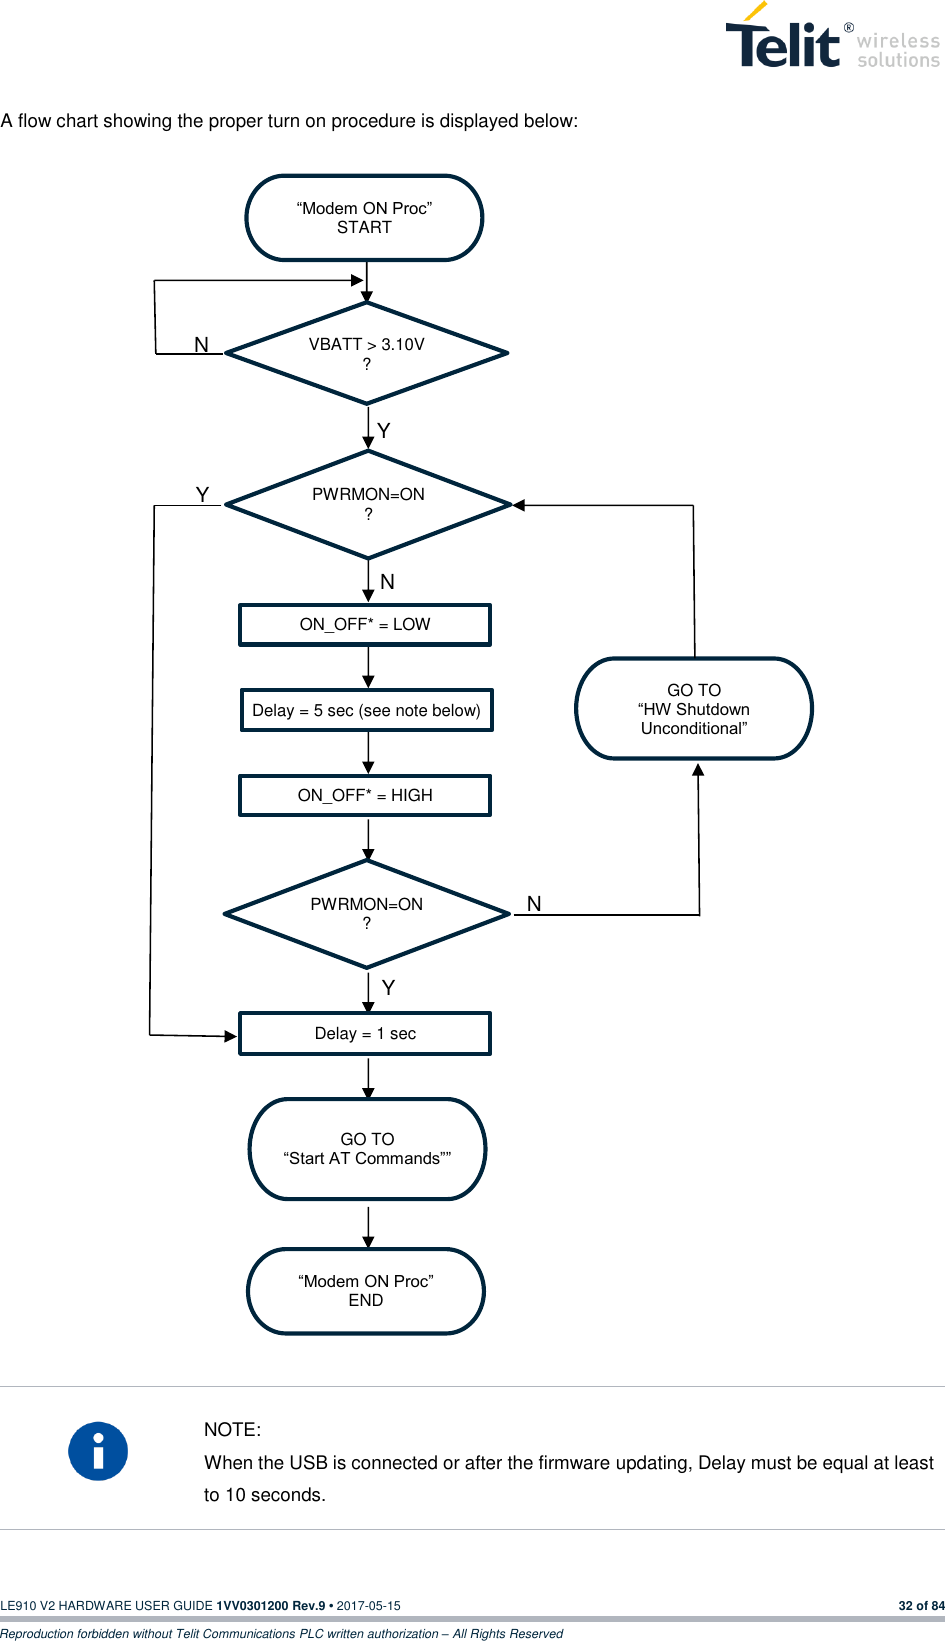   LE910 V2 HARDWARE USER GUIDE 1VV0301200 Rev.9 • 2017-05-15 32 of 84 Reproduction forbidden without Telit Communications PLC written authorization – All Rights Reserved A flow chart showing the proper turn on procedure is displayed below:                                            NOTE: When the USB is connected or after the firmware updating, Delay must be equal at least to 10 seconds. “Modem ON Proc” START VBATT &gt; 3.10V ? ON_OFF* = LOW PWRMON=ON ? Delay = 5 sec (see note below) ON_OFF* = HIGH GO TO “HW Shutdown Unconditional” PWRMON=ON ? Delay = 1 sec GO TO “Start AT Commands”” “Modem ON Proc” END N N Y Y Y N 